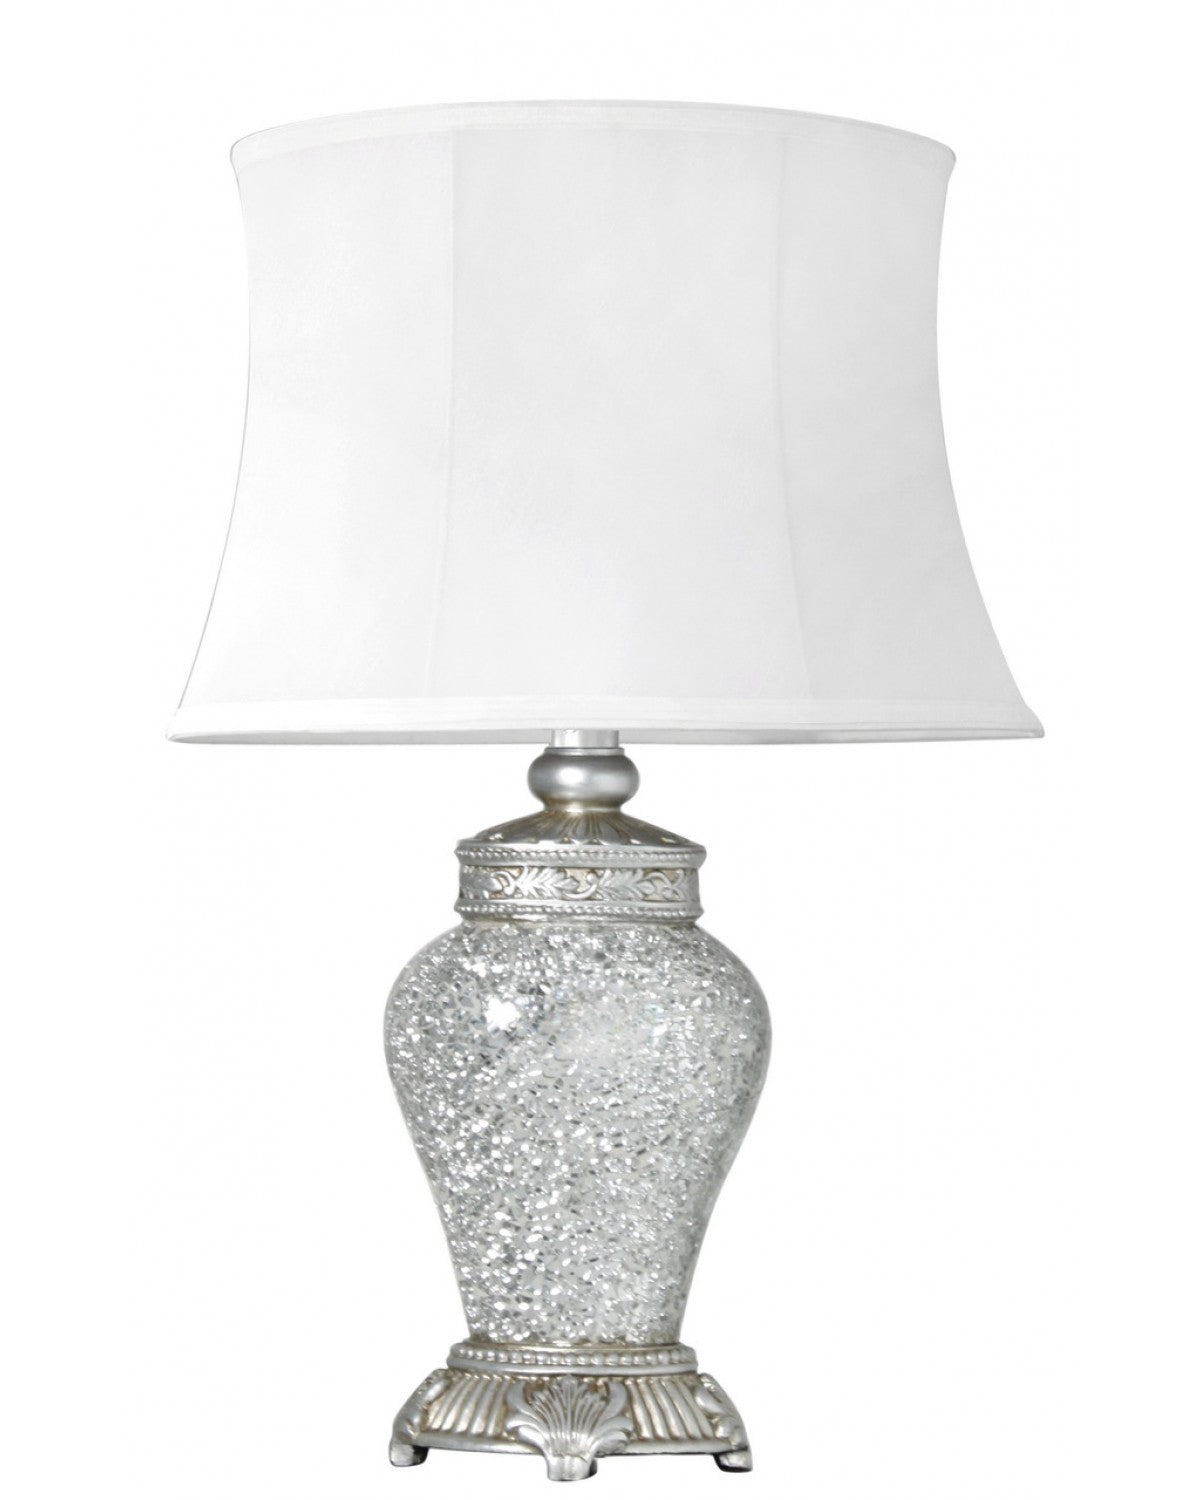 Deco Home Silver Sparkle Mosaic Medium Antique Silver Regency Lamp With Silver Trimmed White Shade